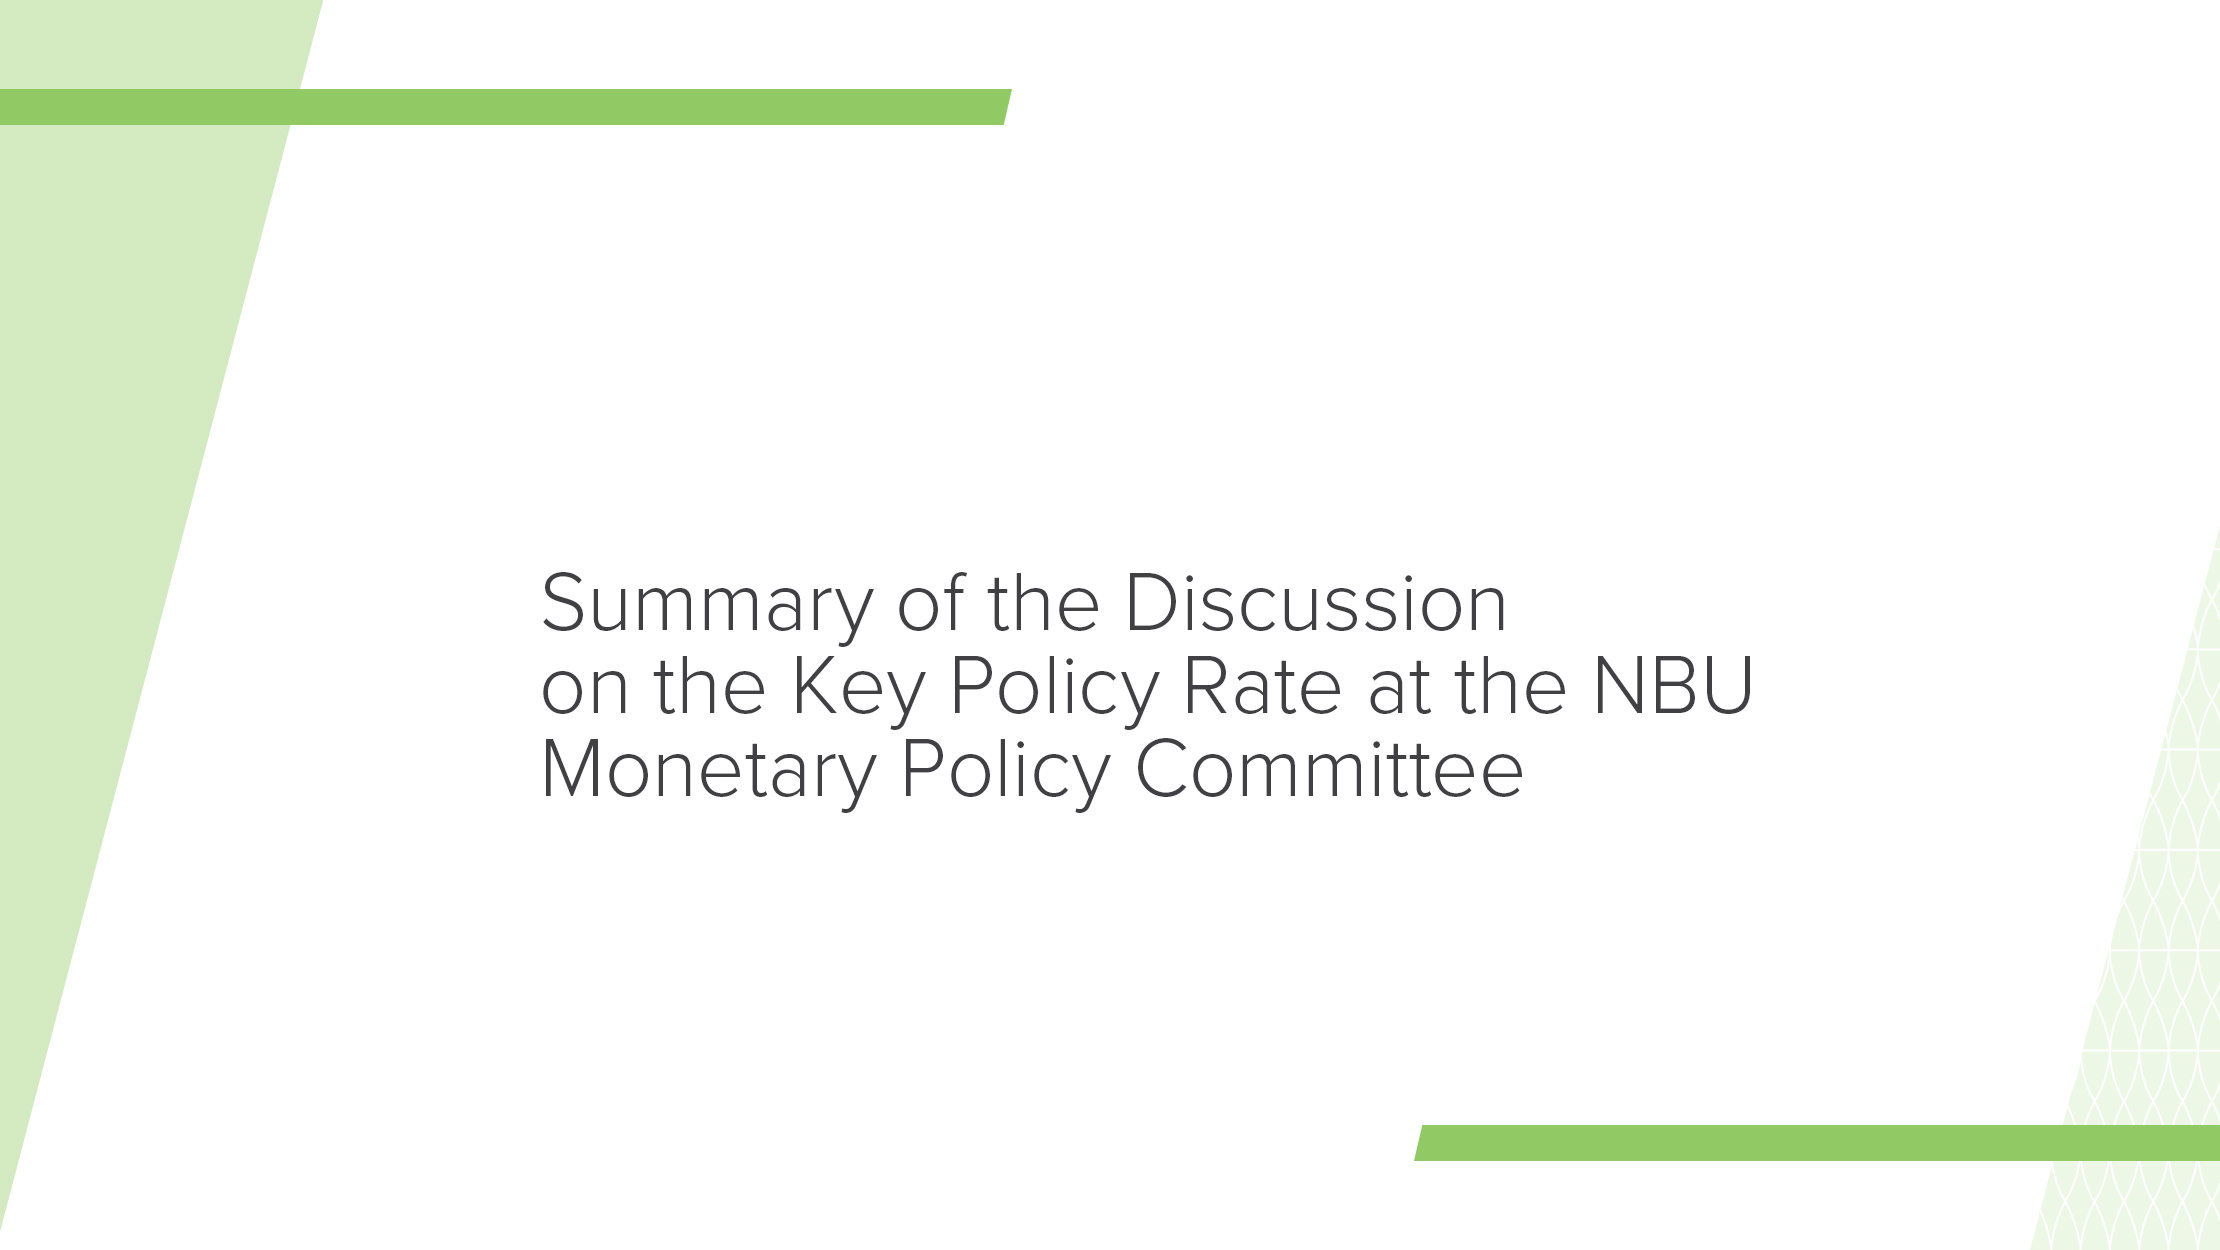 Summary of Key Policy Rate Discussion by NBU Monetary Policy Committee on 13 December 2023